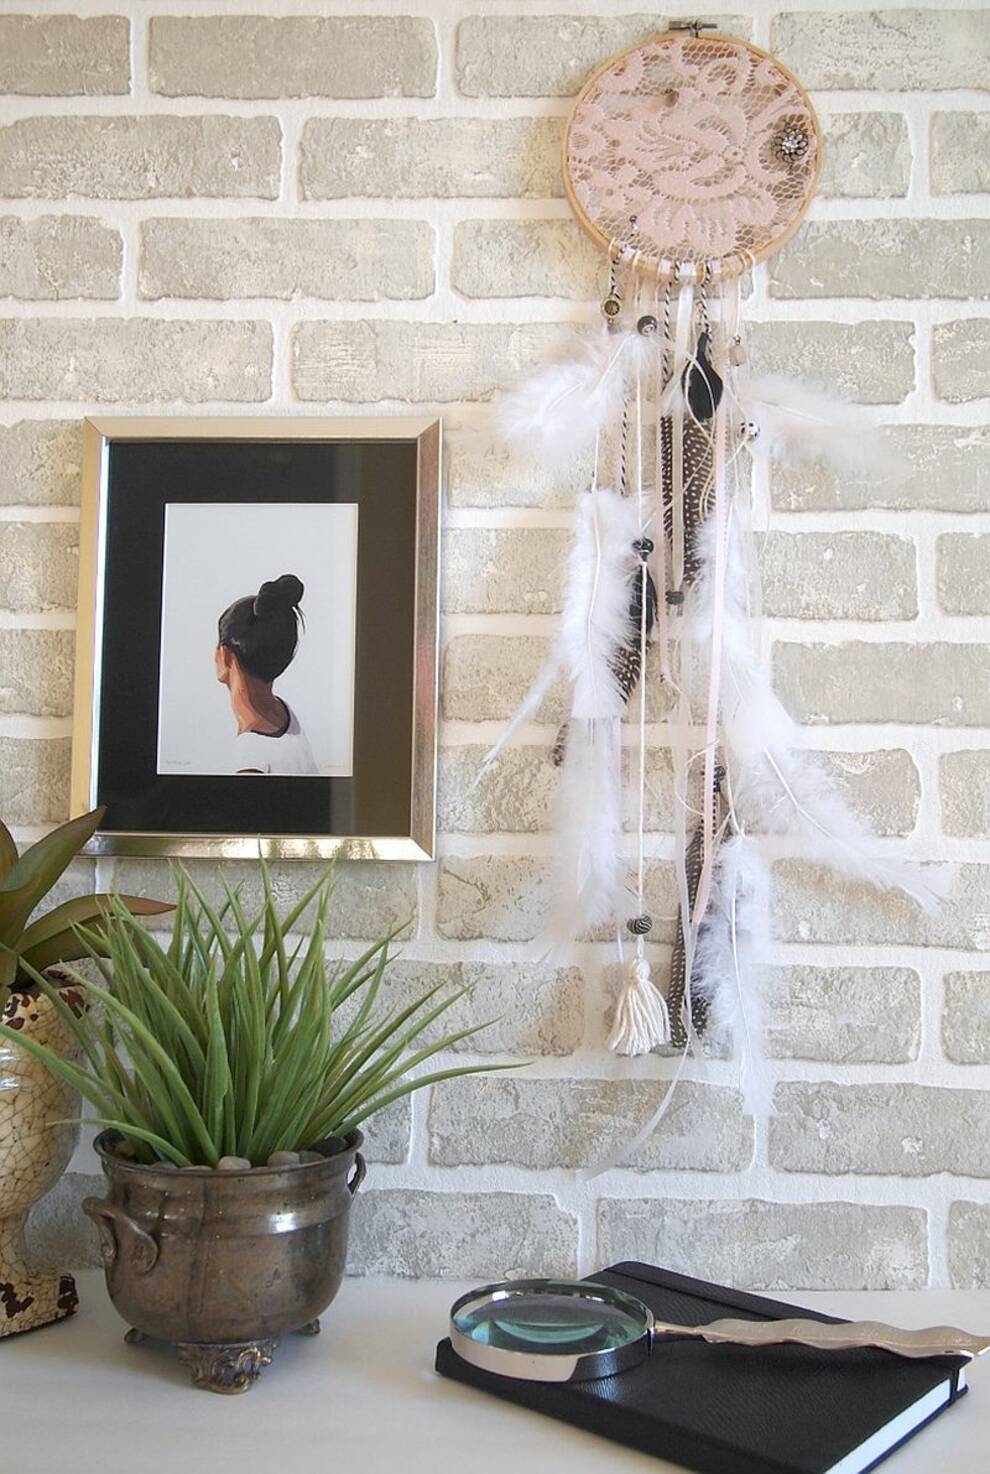 Master class from OXO: sophisticated dream catcher